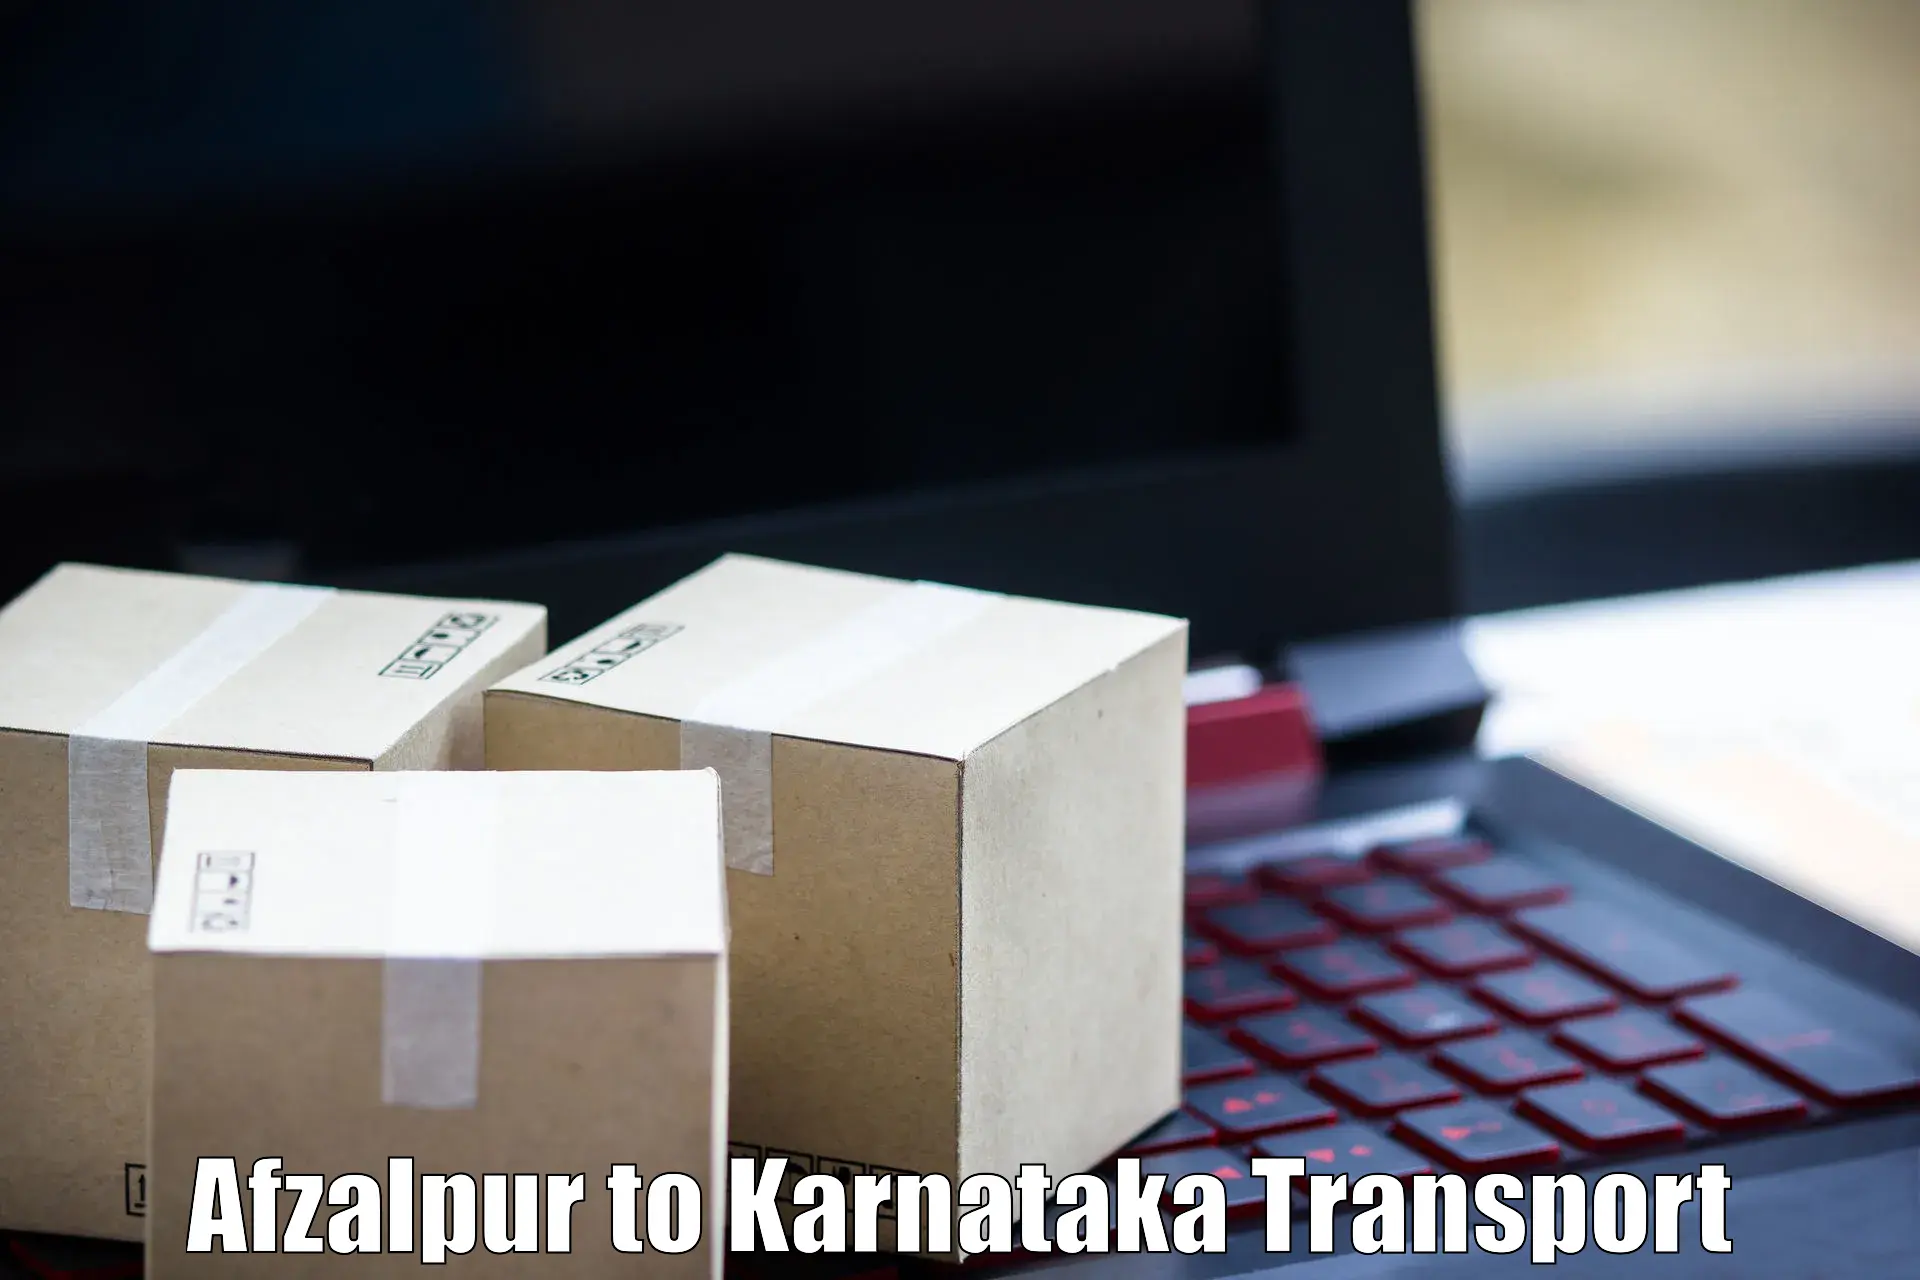 Air freight transport services Afzalpur to Mangalore Port